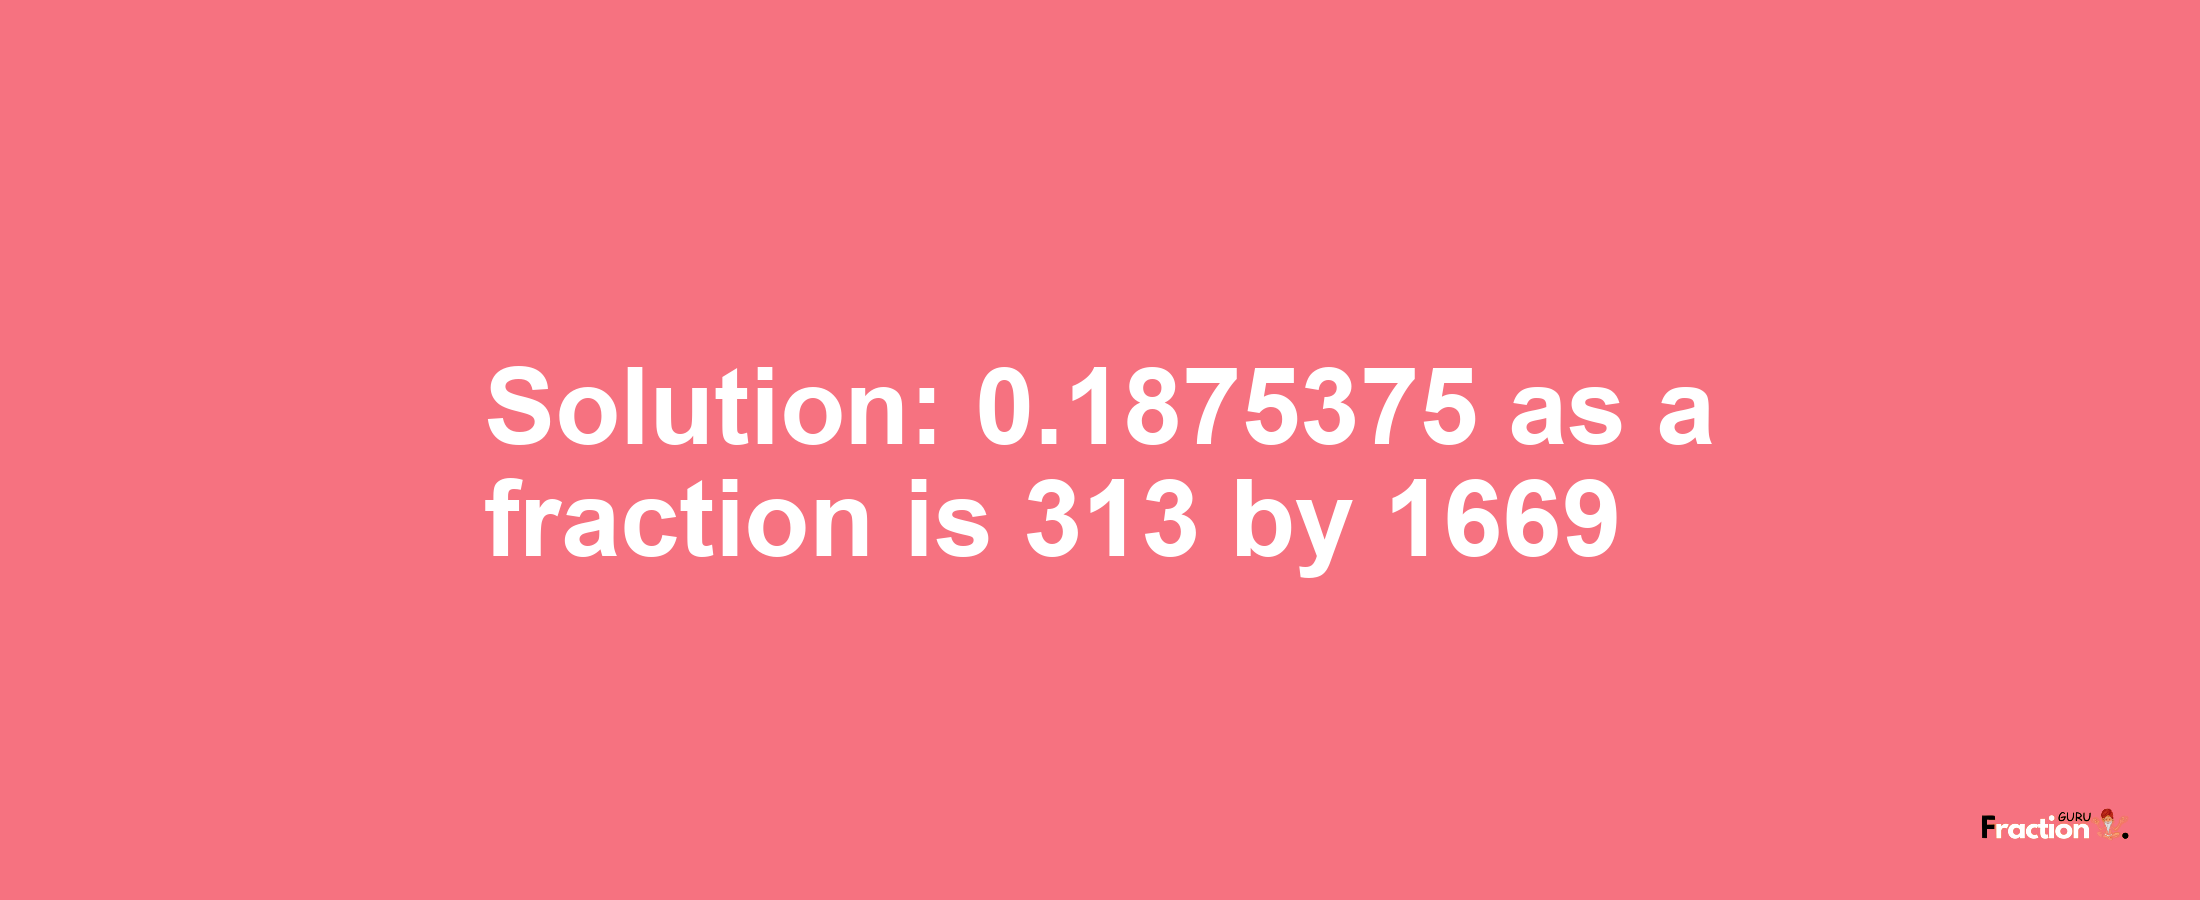 Solution:0.1875375 as a fraction is 313/1669